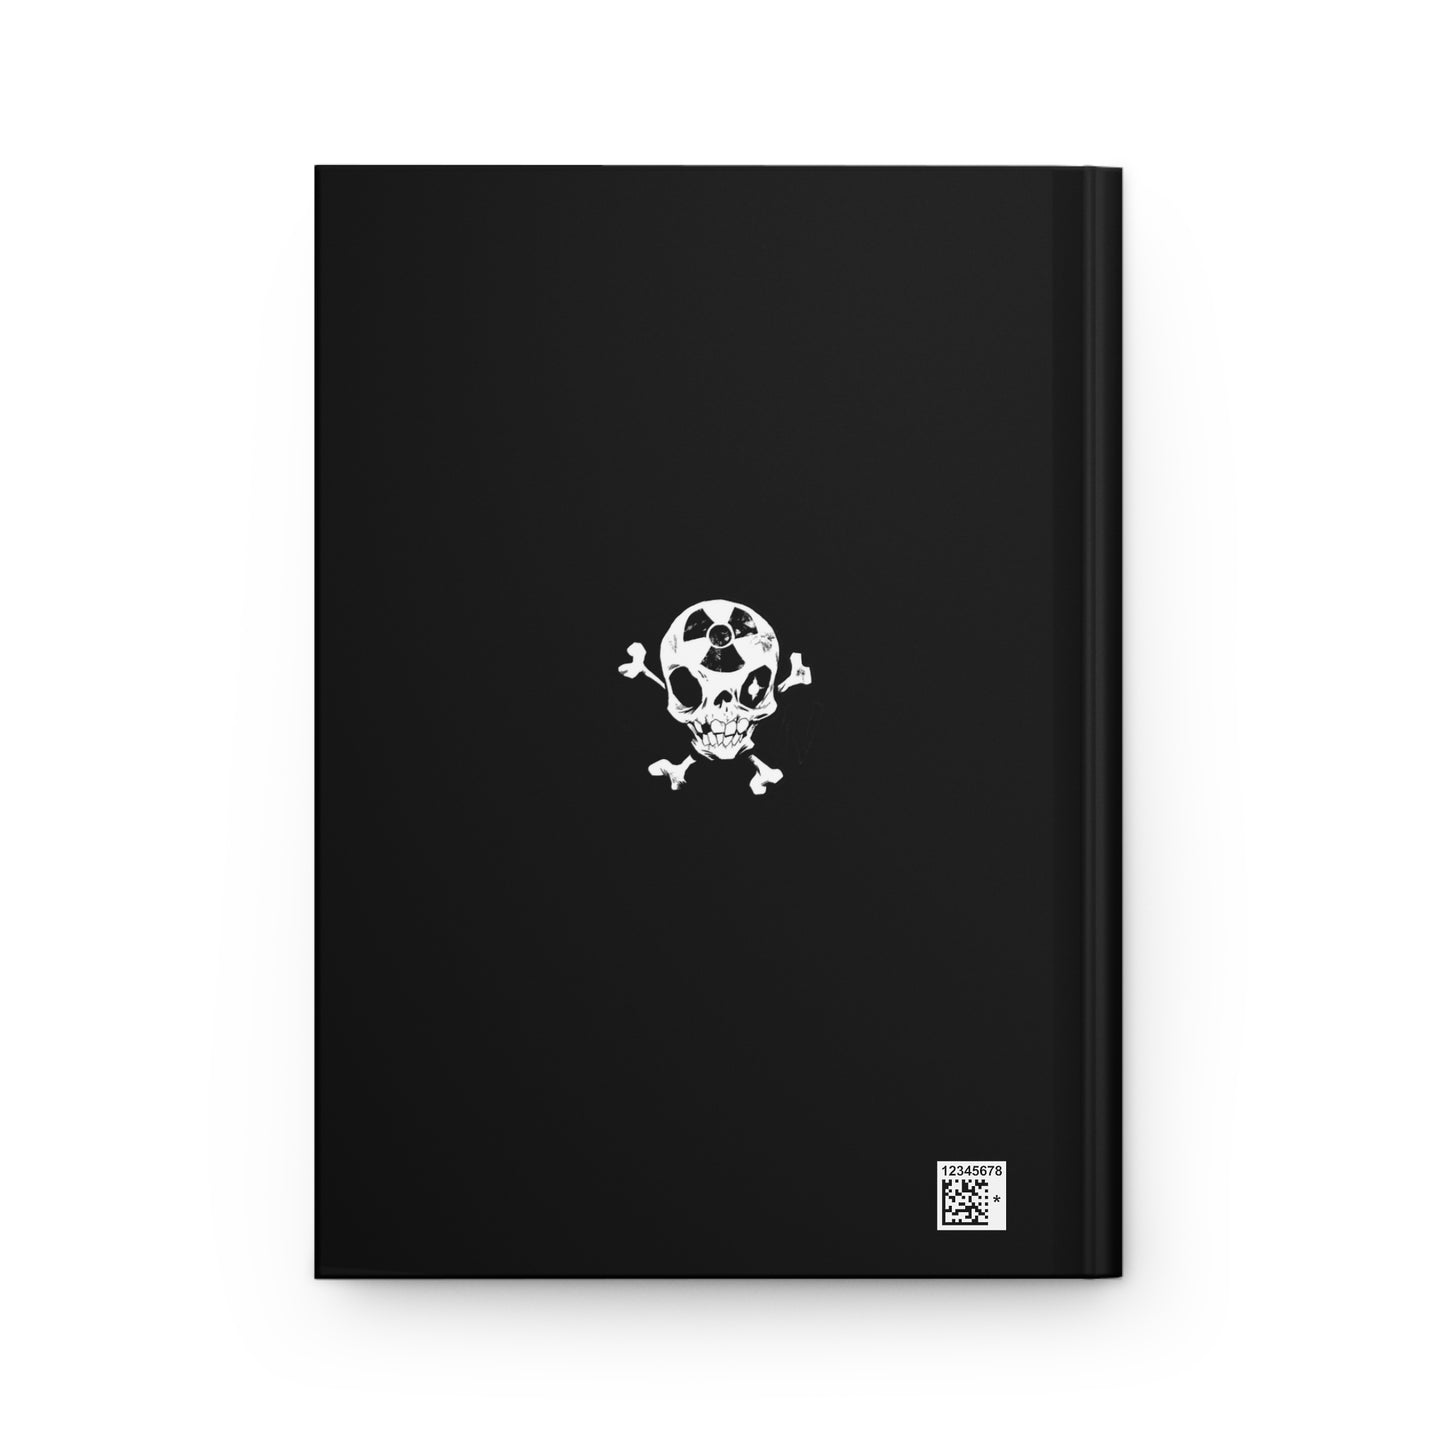 Nuclear Nerds - Hardcover Lore Journal